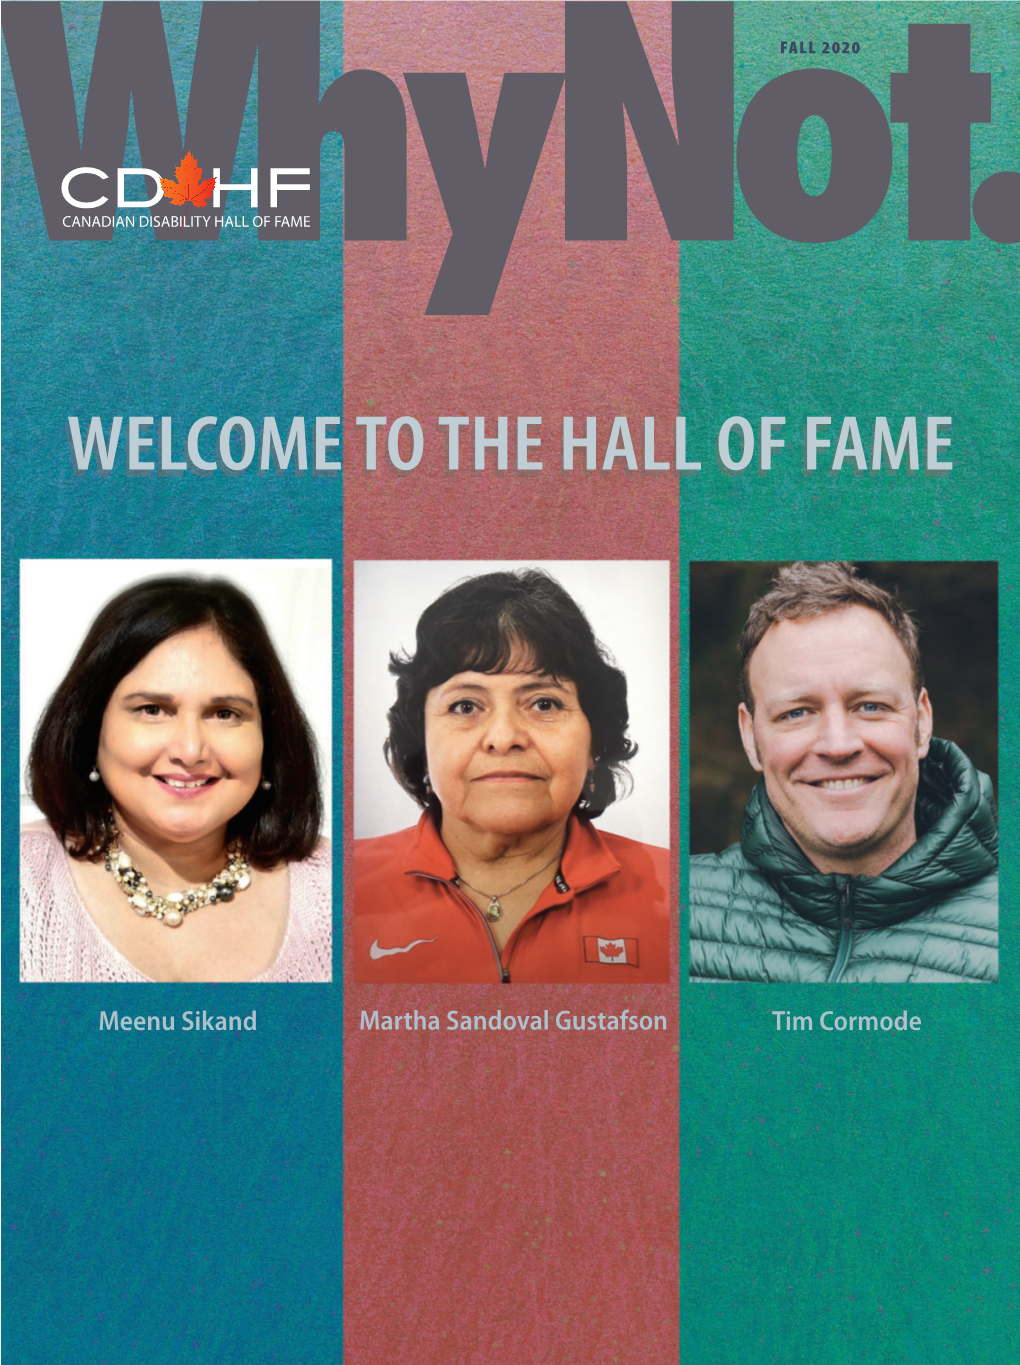 The Canadian Disability Hall of Fame